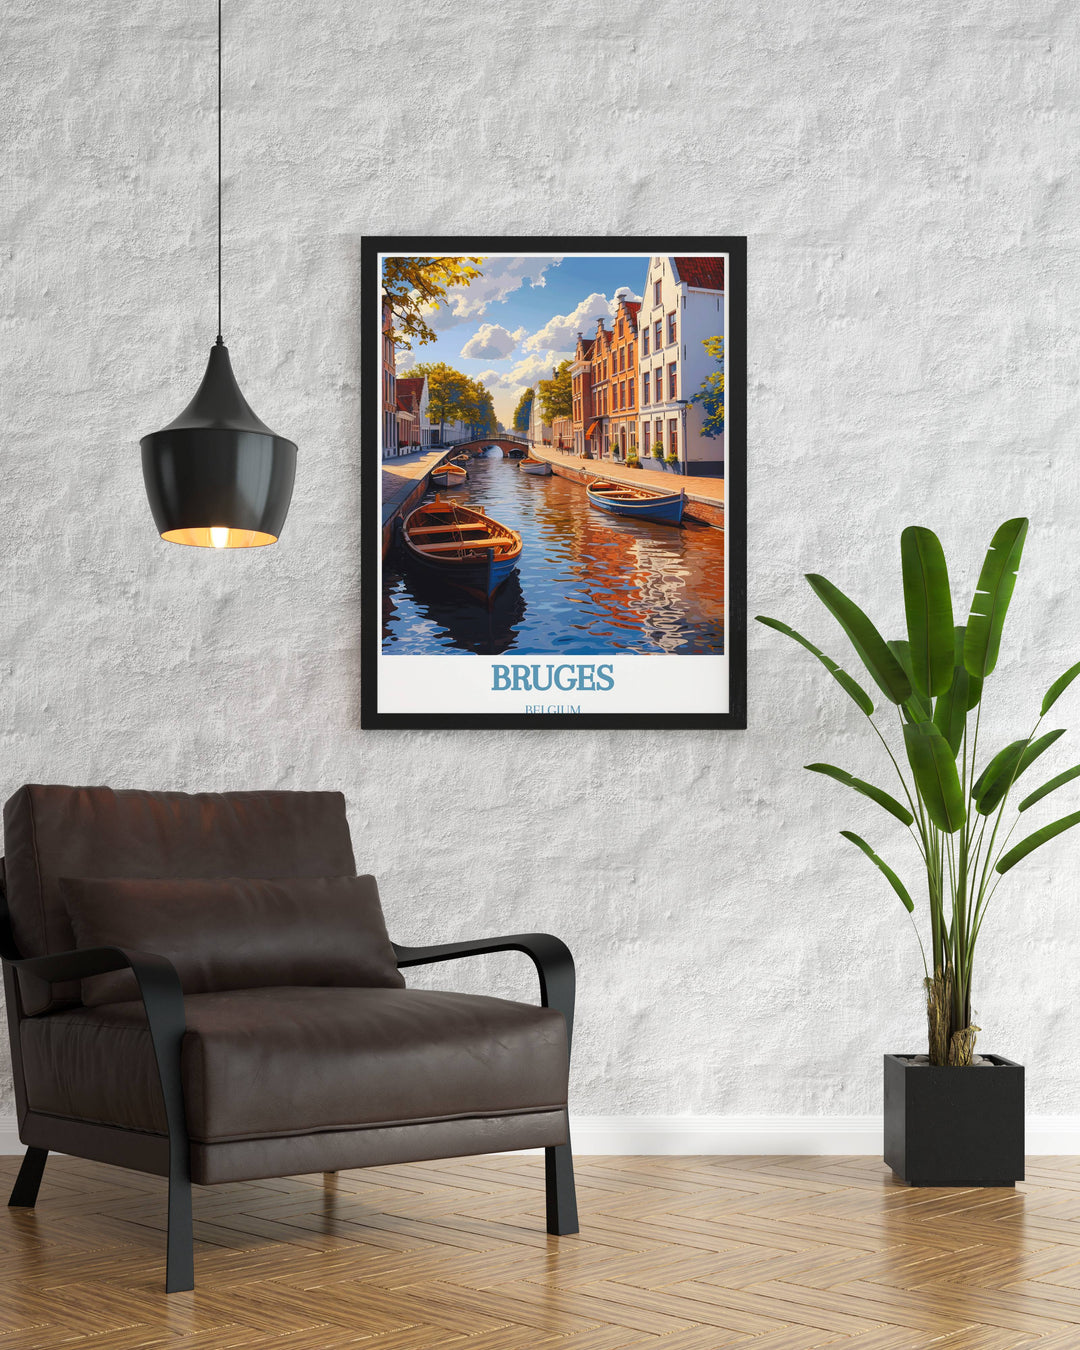 Sunset view over the Canal of Bruges captured in a custom print, showcasing the peaceful evening atmosphere in vibrant colors